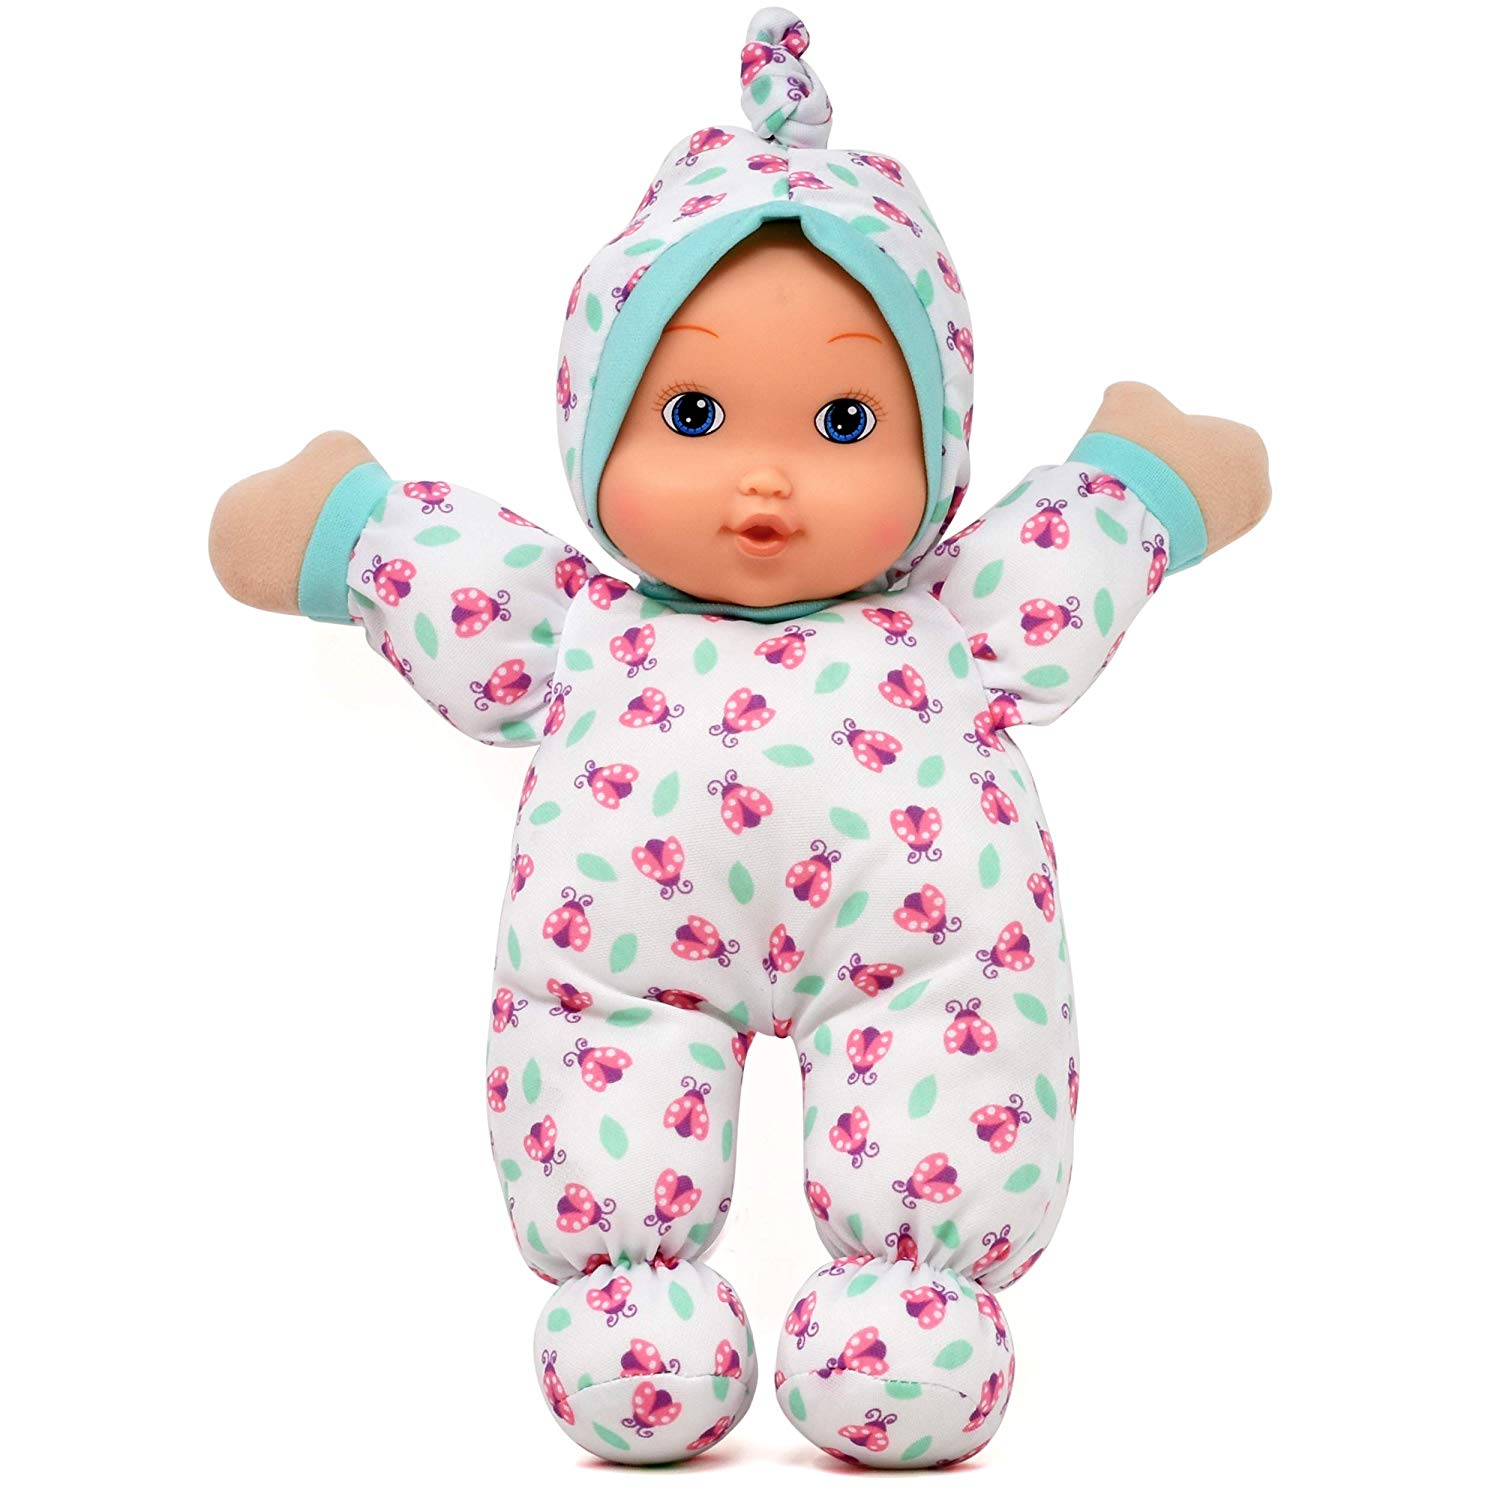 Best Baby Dolls for 1 Year Olds [2020] Top Baby Dolls for 